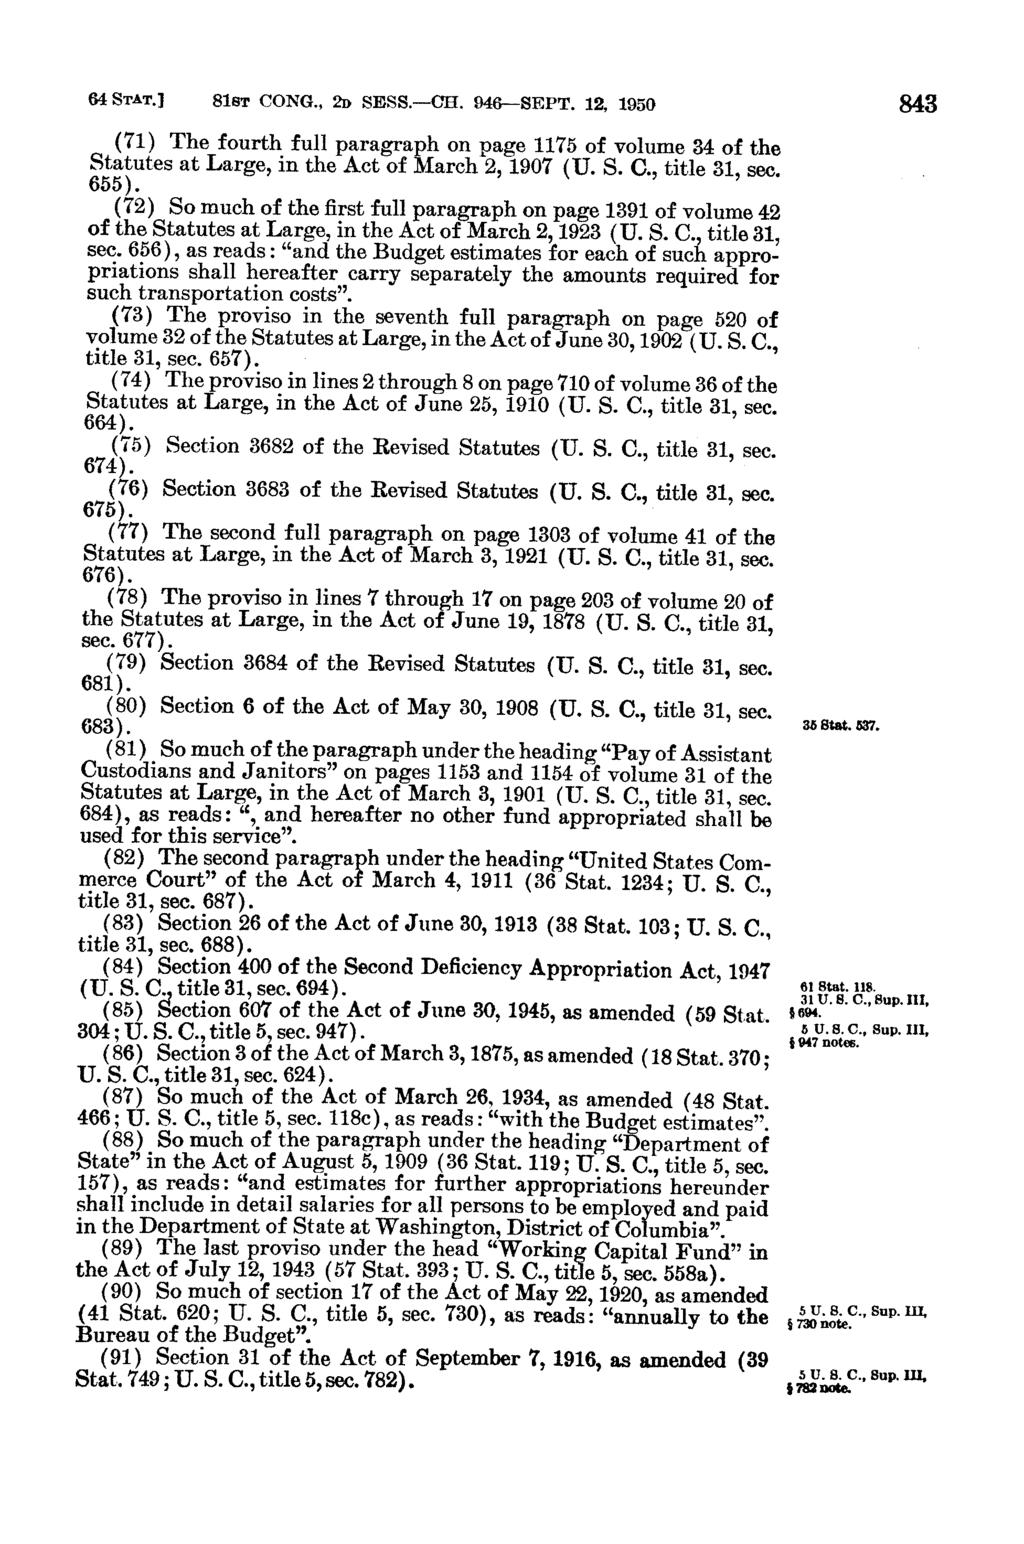 64 STAT.] 81ST CONG., 2D SESS.--CH. 946-SEPT. 12, 1950 (71) The fourth full paragraph on page 1175 of volume 34 of the Statutes at Large, in the Act of March 2, 1907 (U. S. C., title 31, sec. 655).